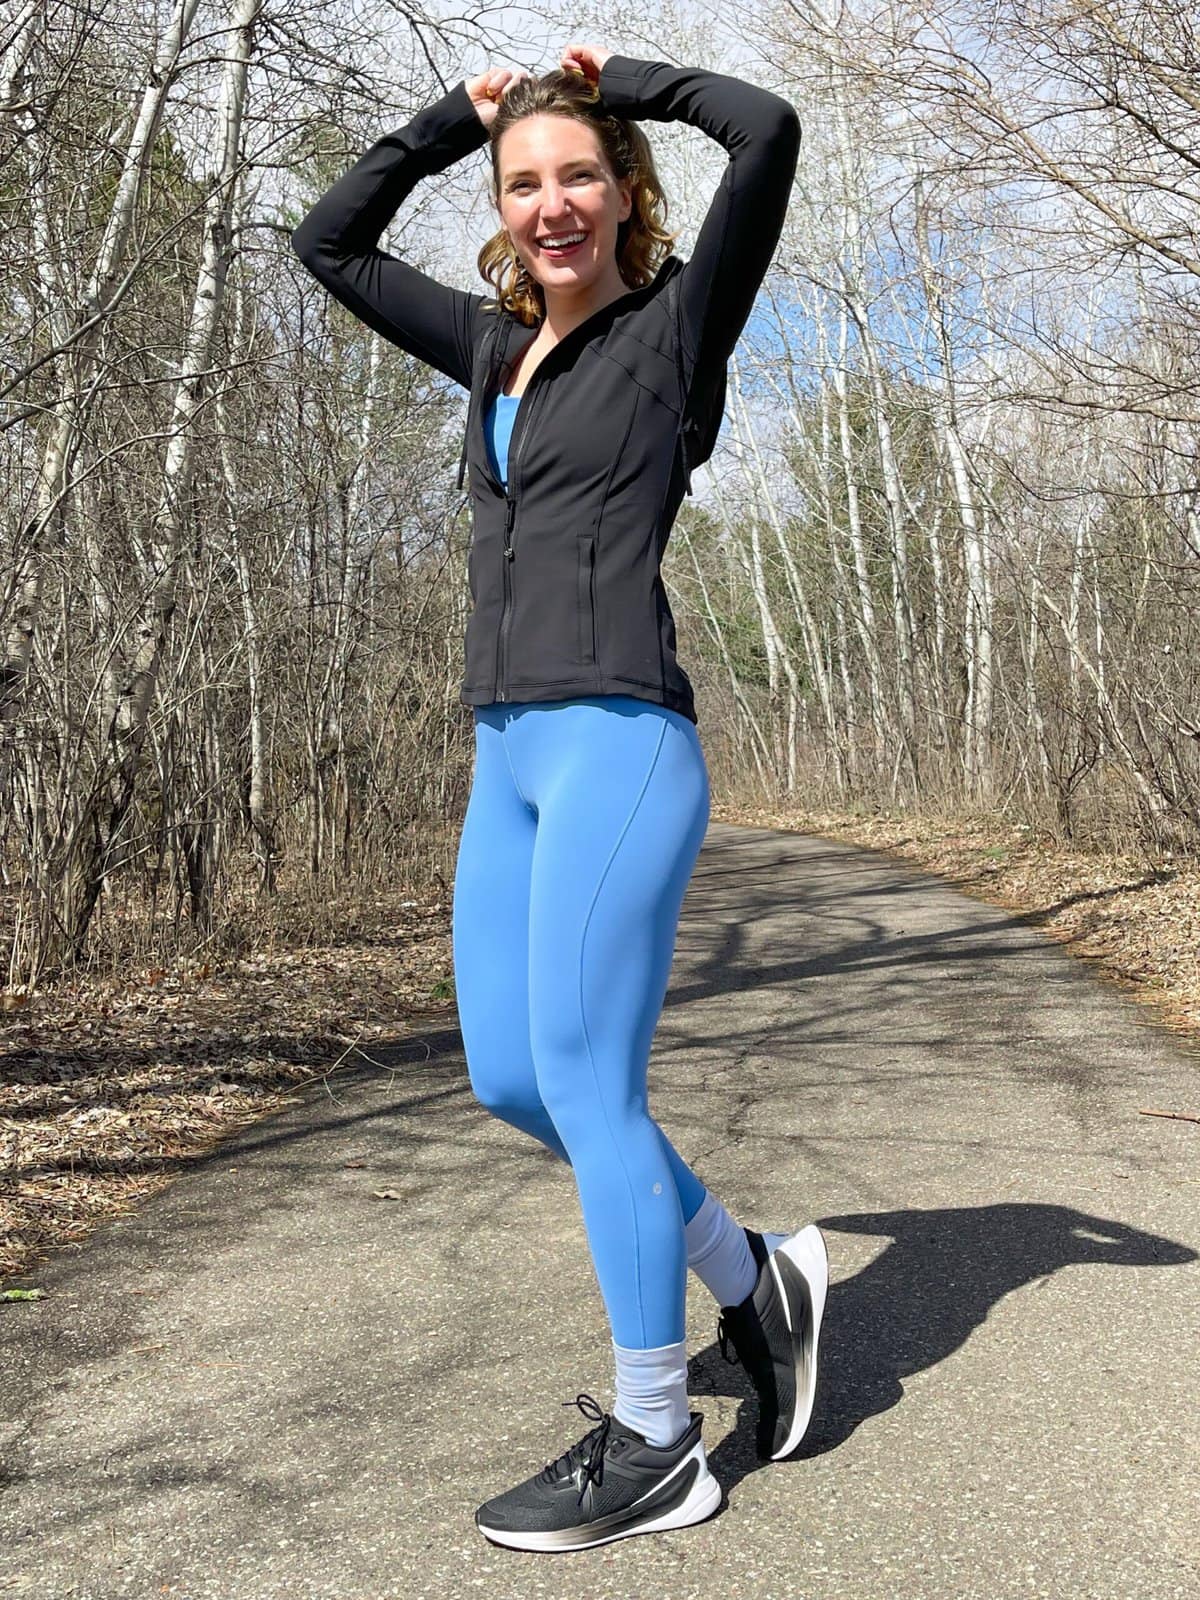 Lululemon Blissfeel review: We tried the brand's first running shoe